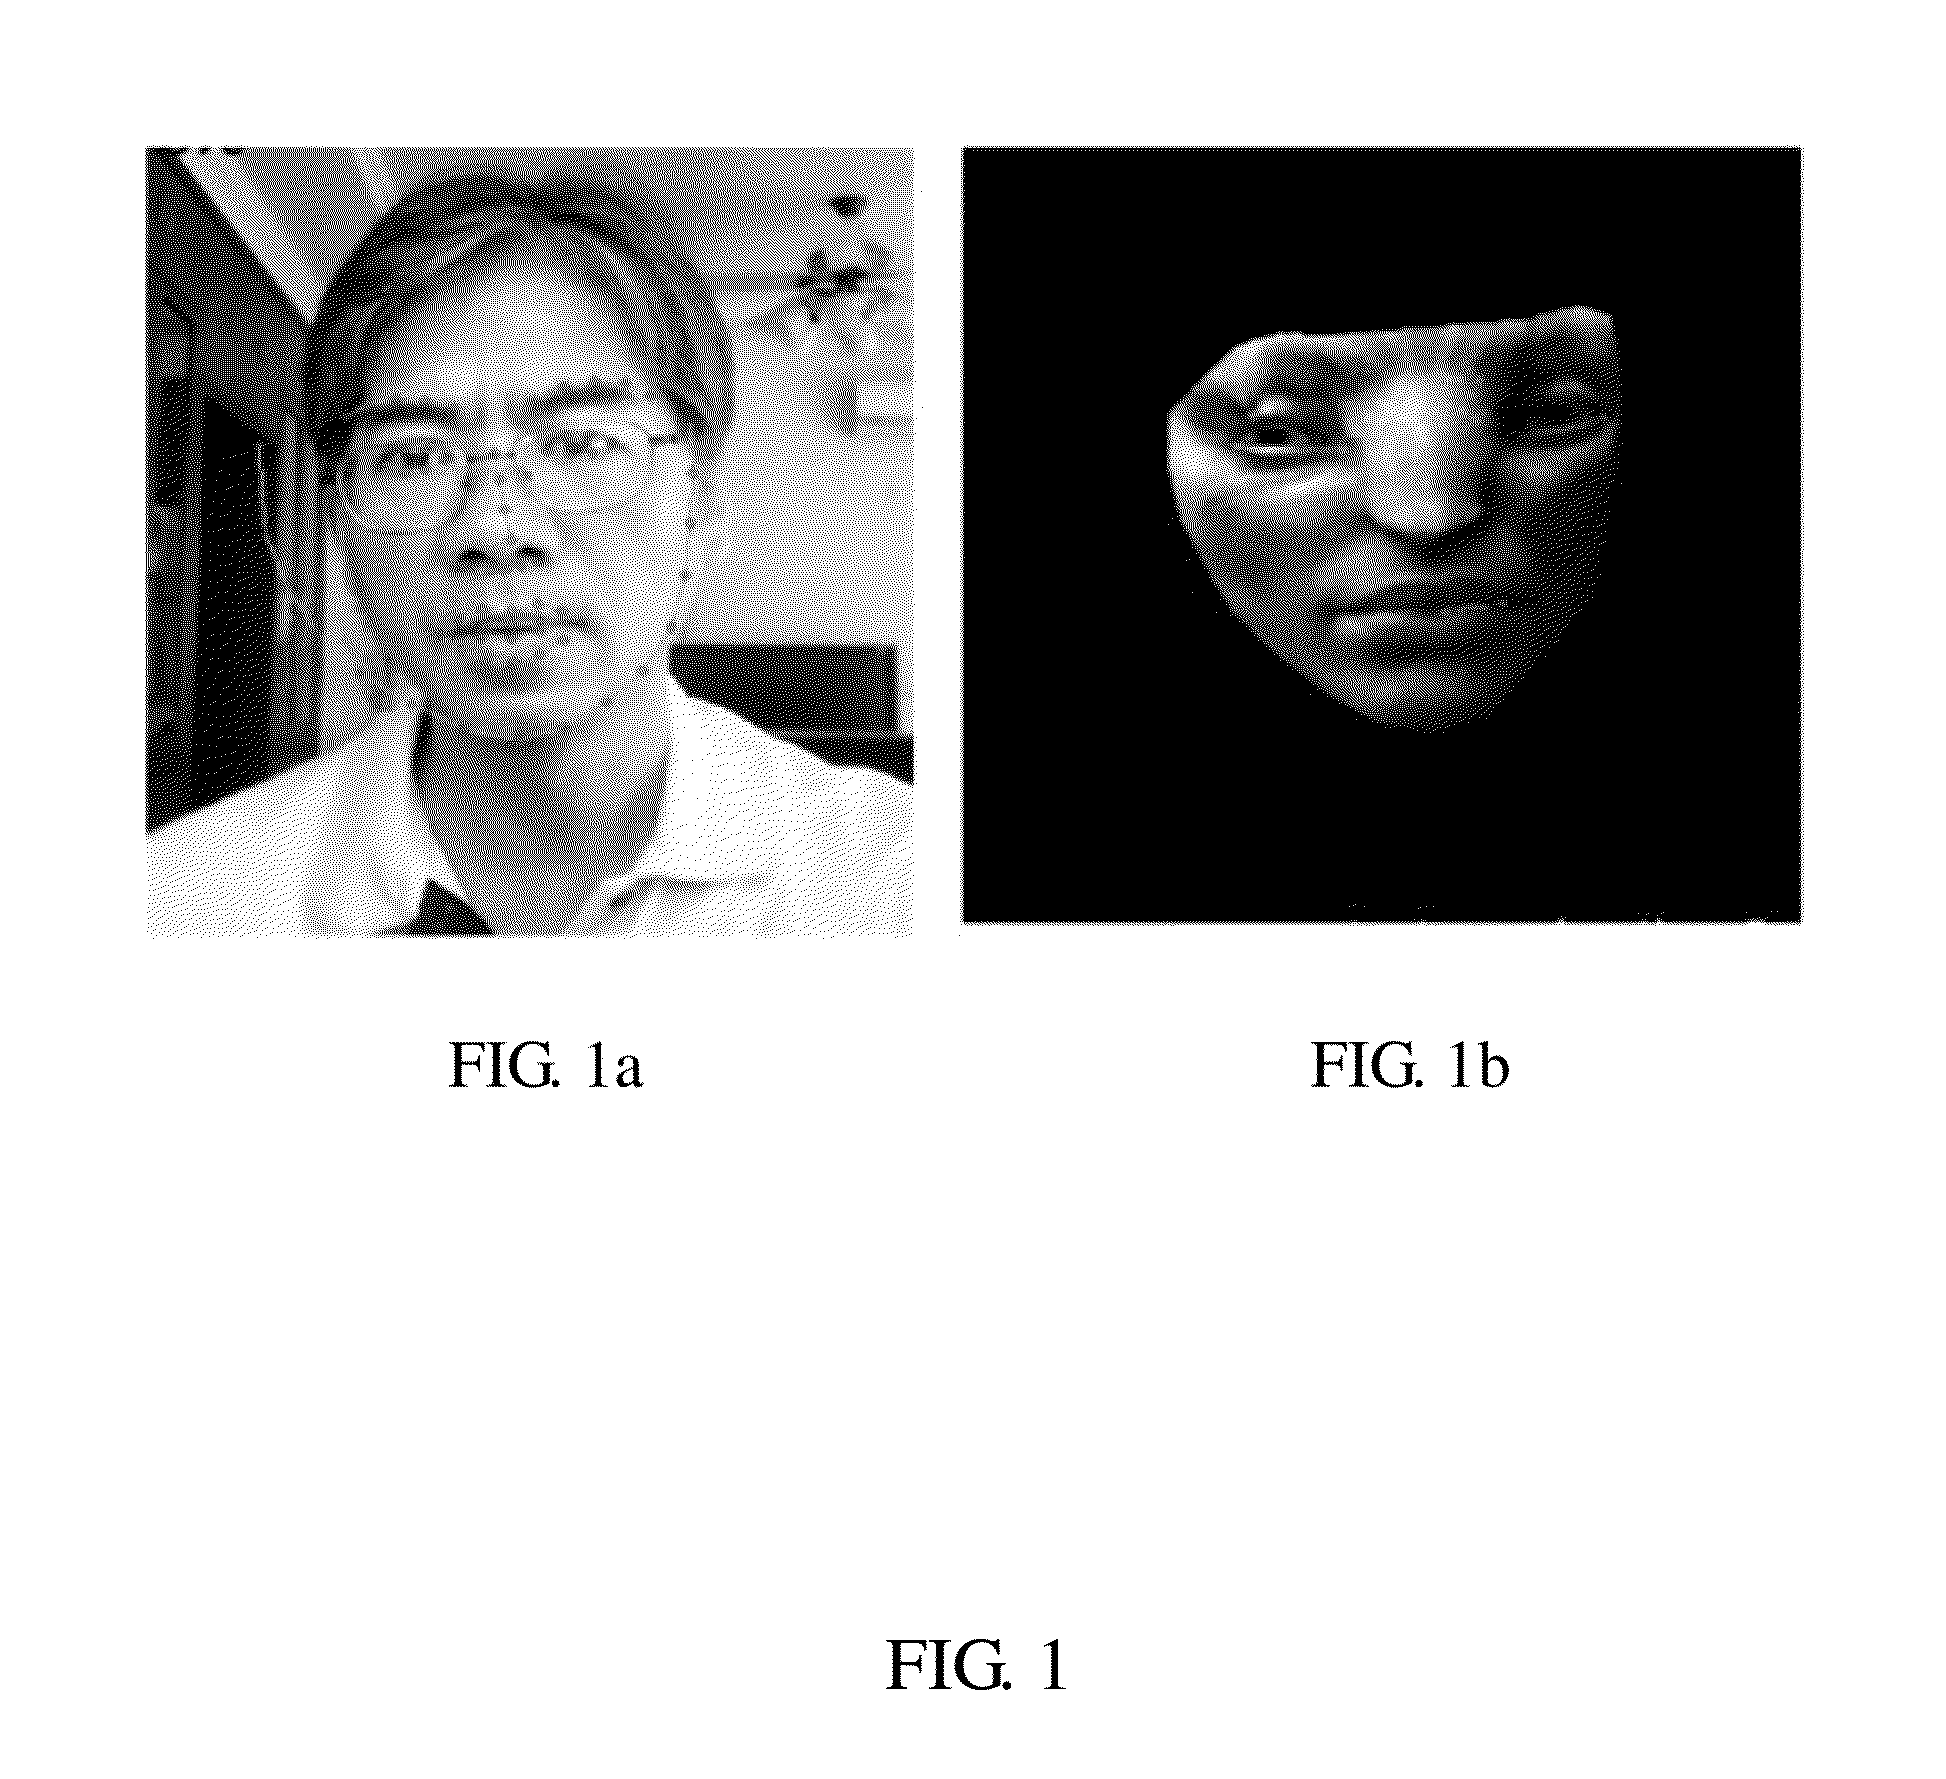 Human body and facial animation systems with 3D camera and method thereof